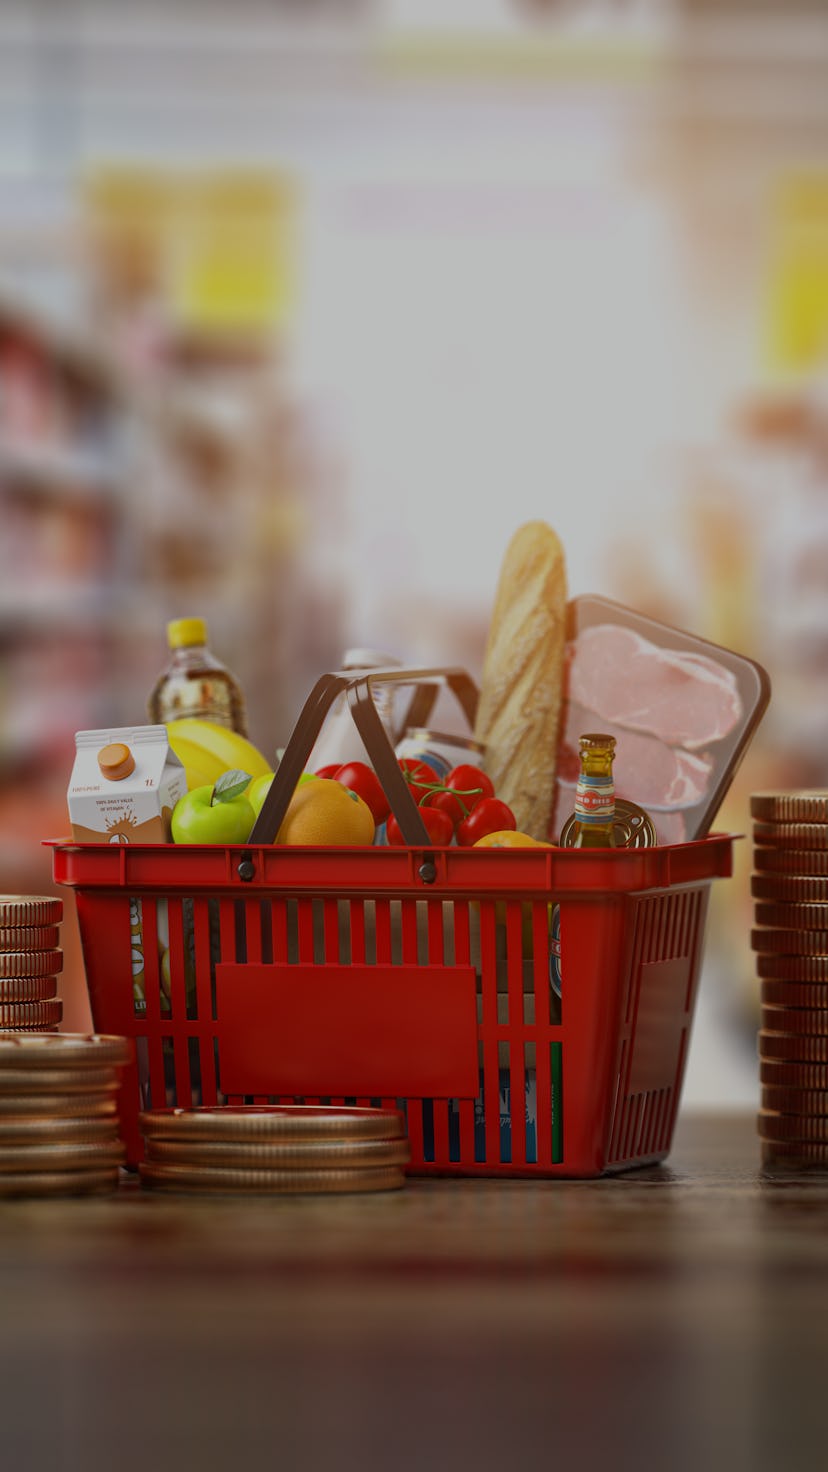 Growth of food sales or growth of market basket or consumer price index concept. Shopping basket wit...